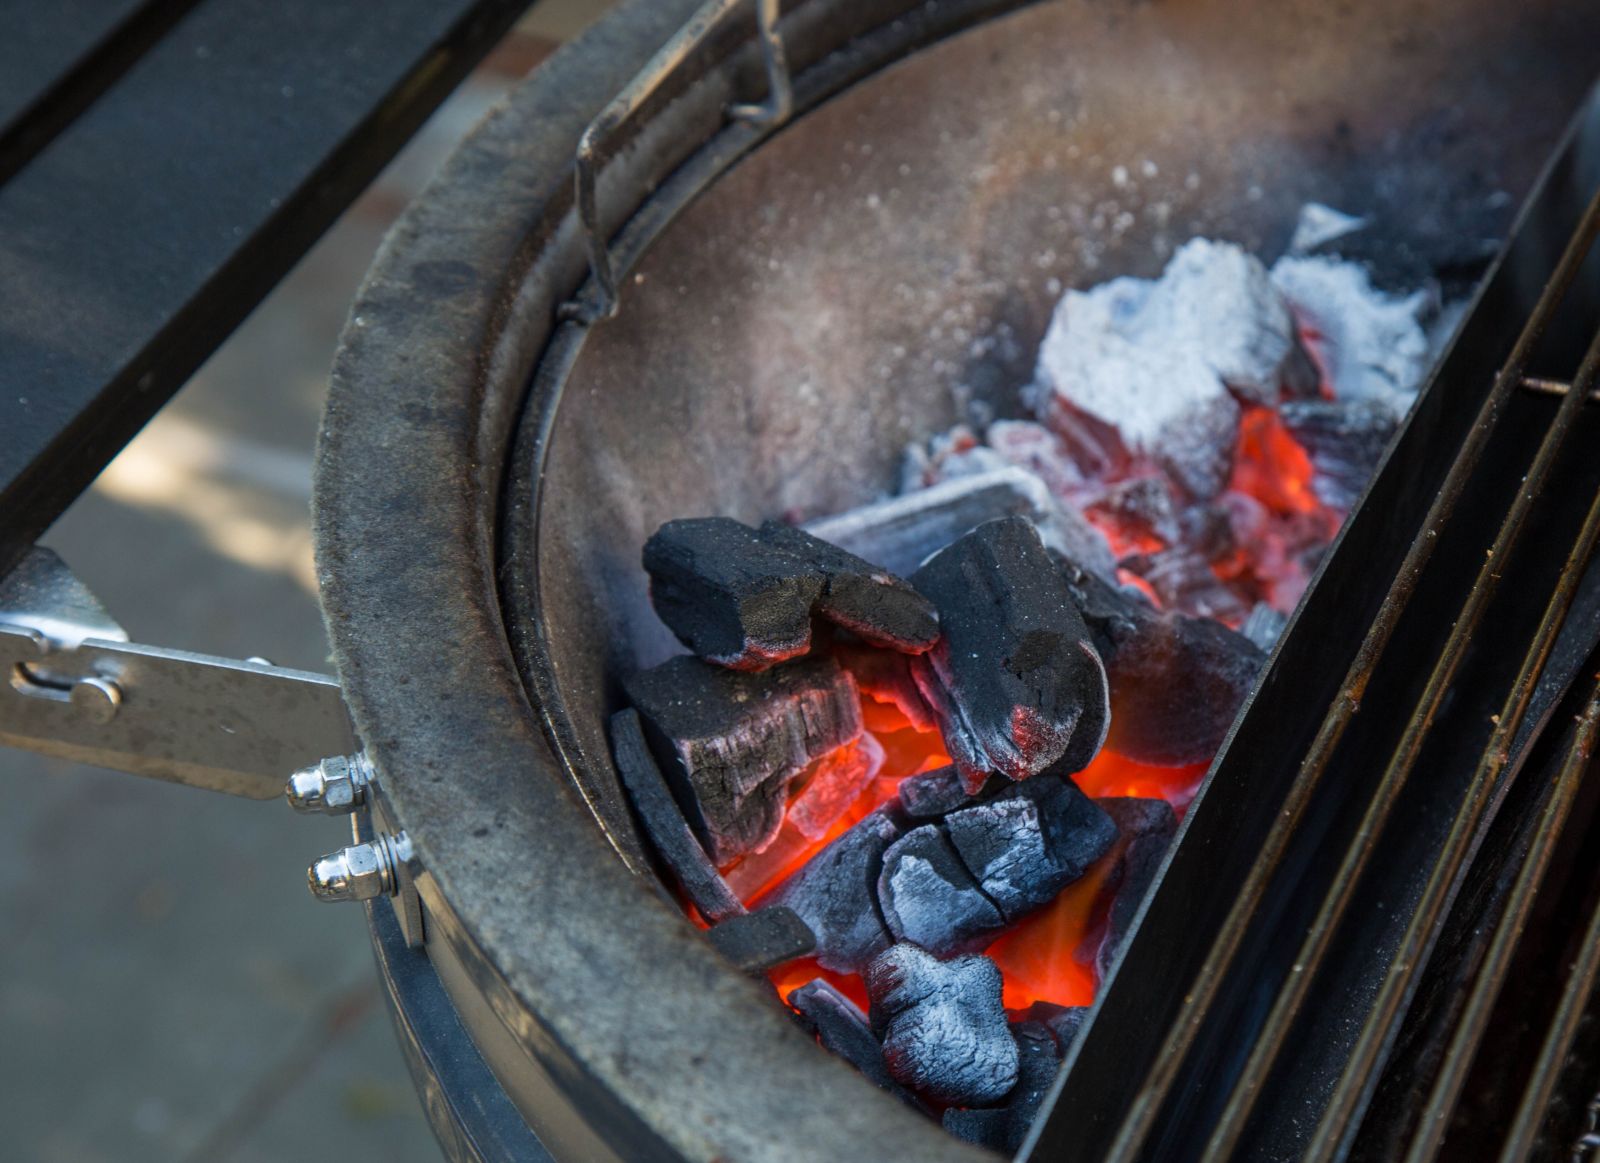 This is a picture of hot coals burning in the slow n Sear